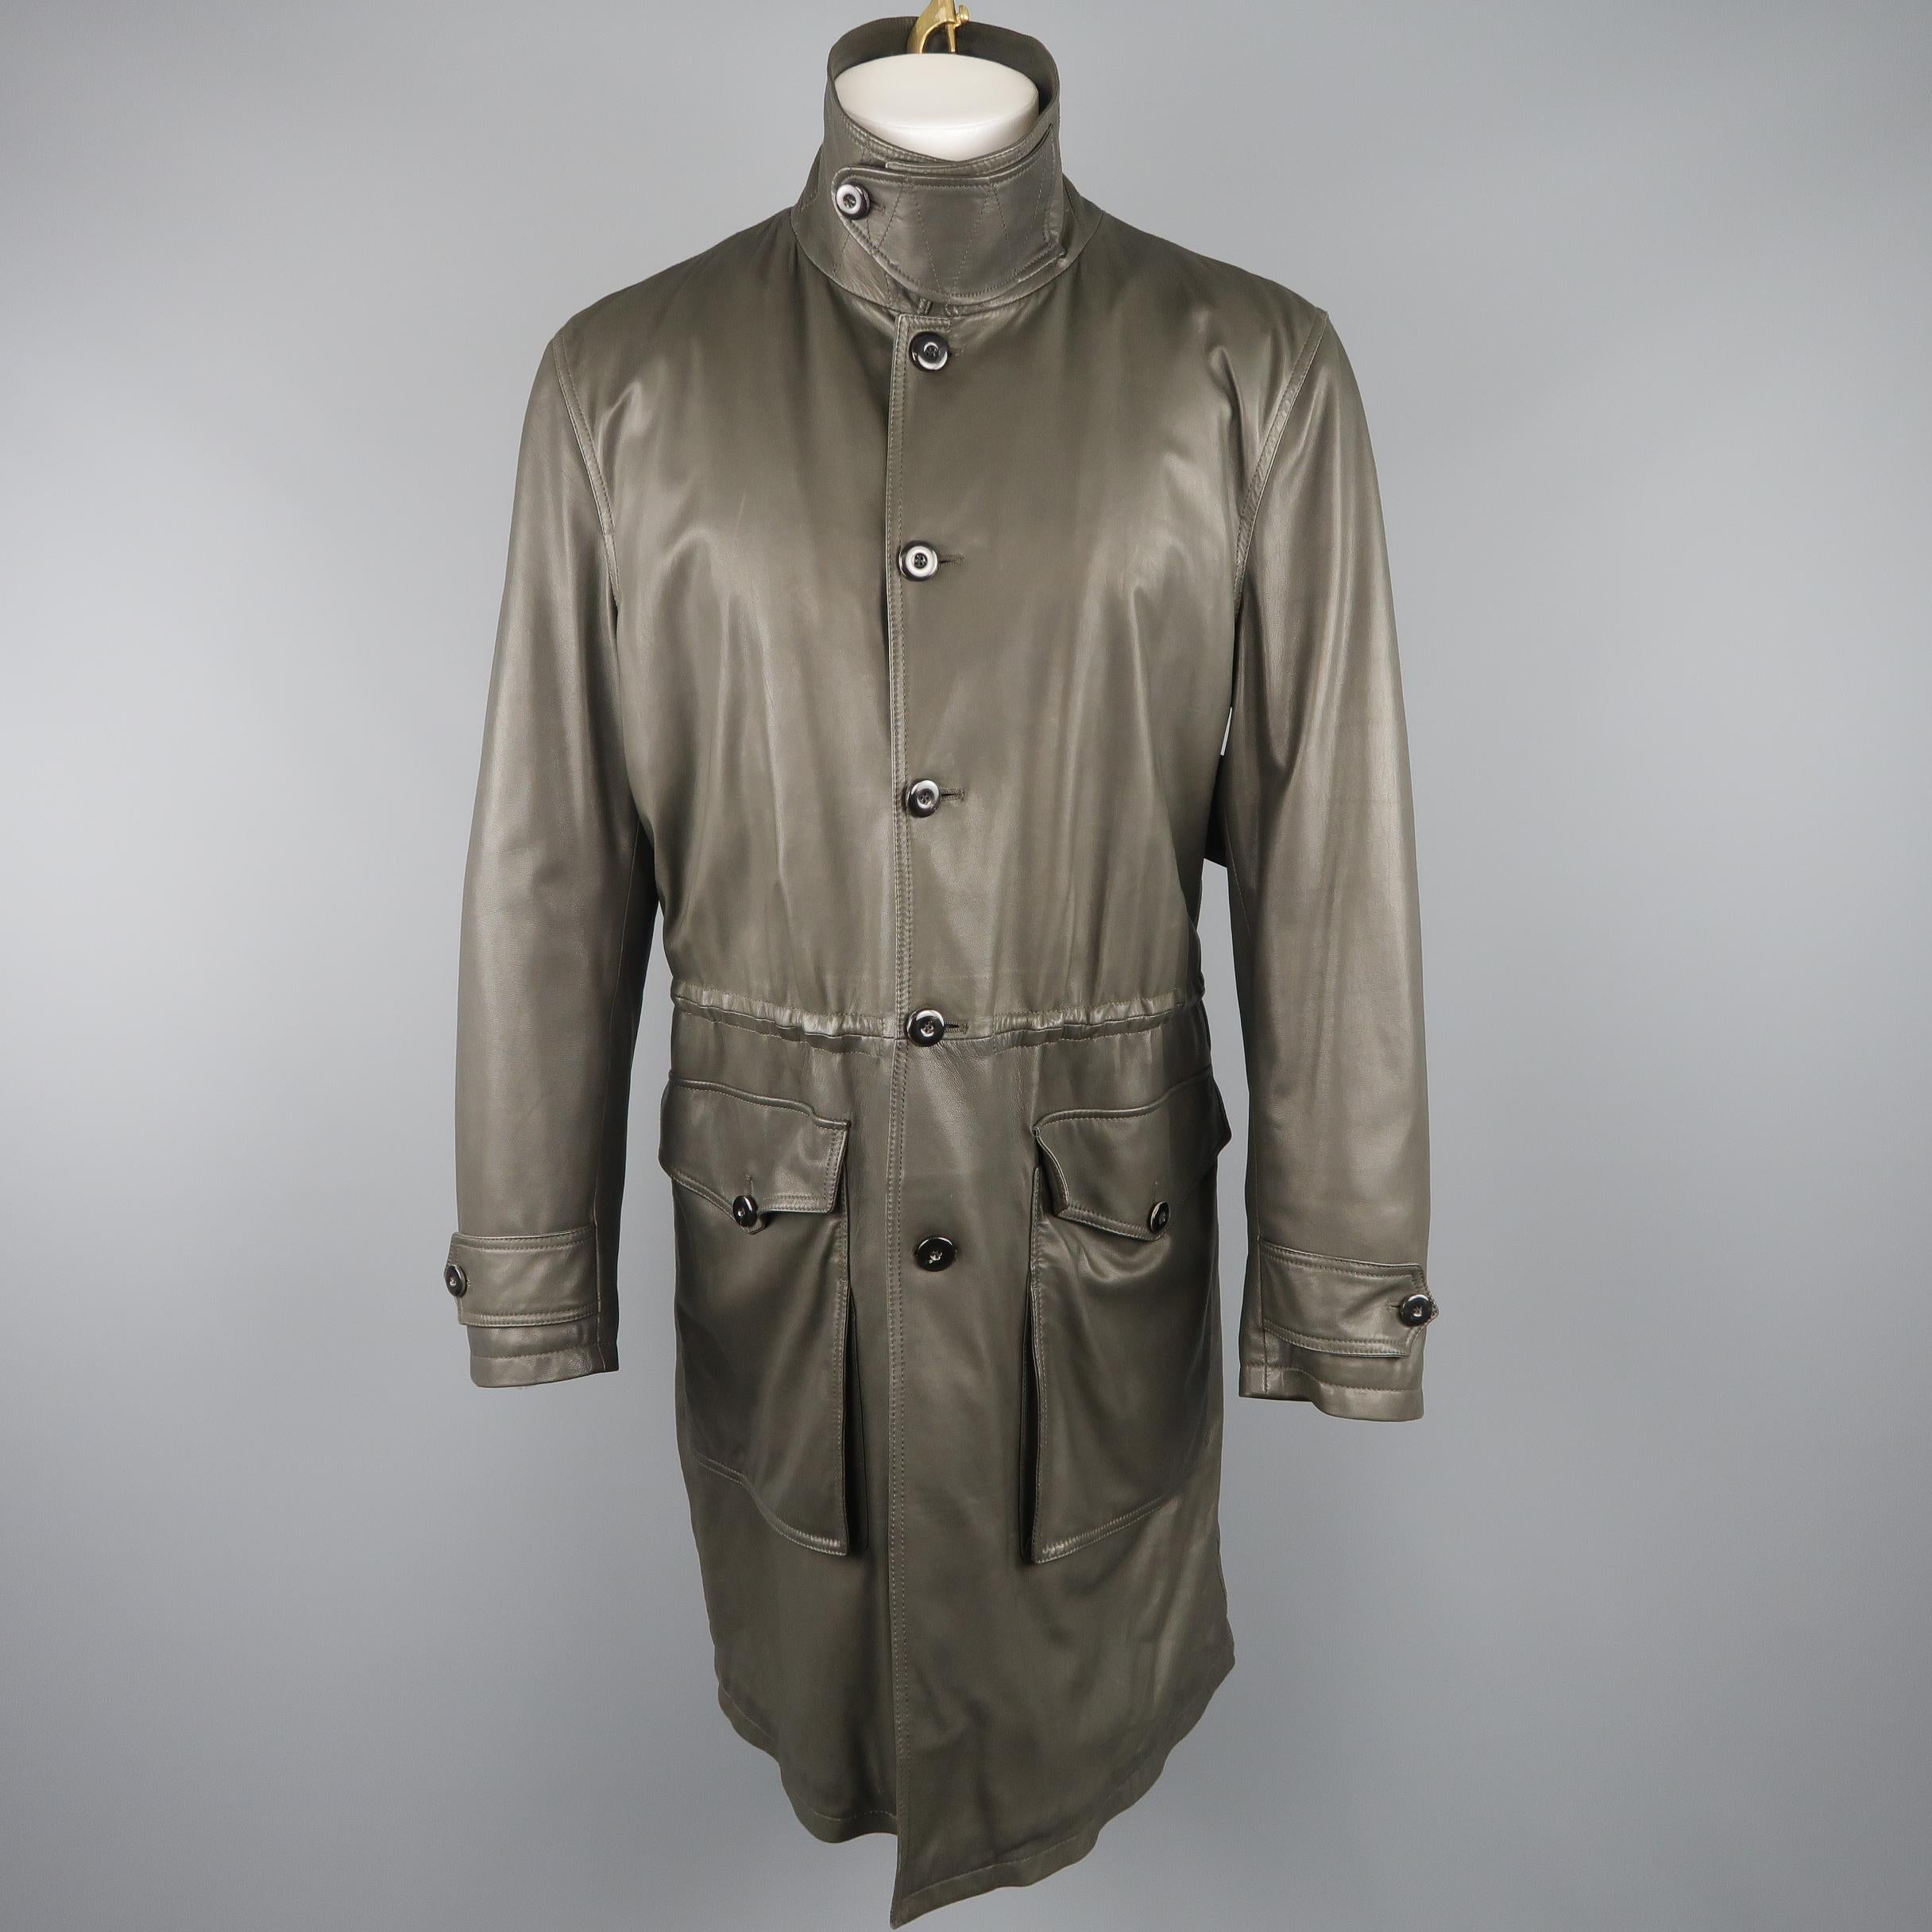 GIORGIO ARMANI coat comes in olive green smooth lambskin leather with a pointed collar, button up front, patch flap pockets, tab cuffs, and elastic drawstring waist. Made in Italy.
 
Good Pre-Owned Condition.
Marked: IT 50
 
Measurements:
